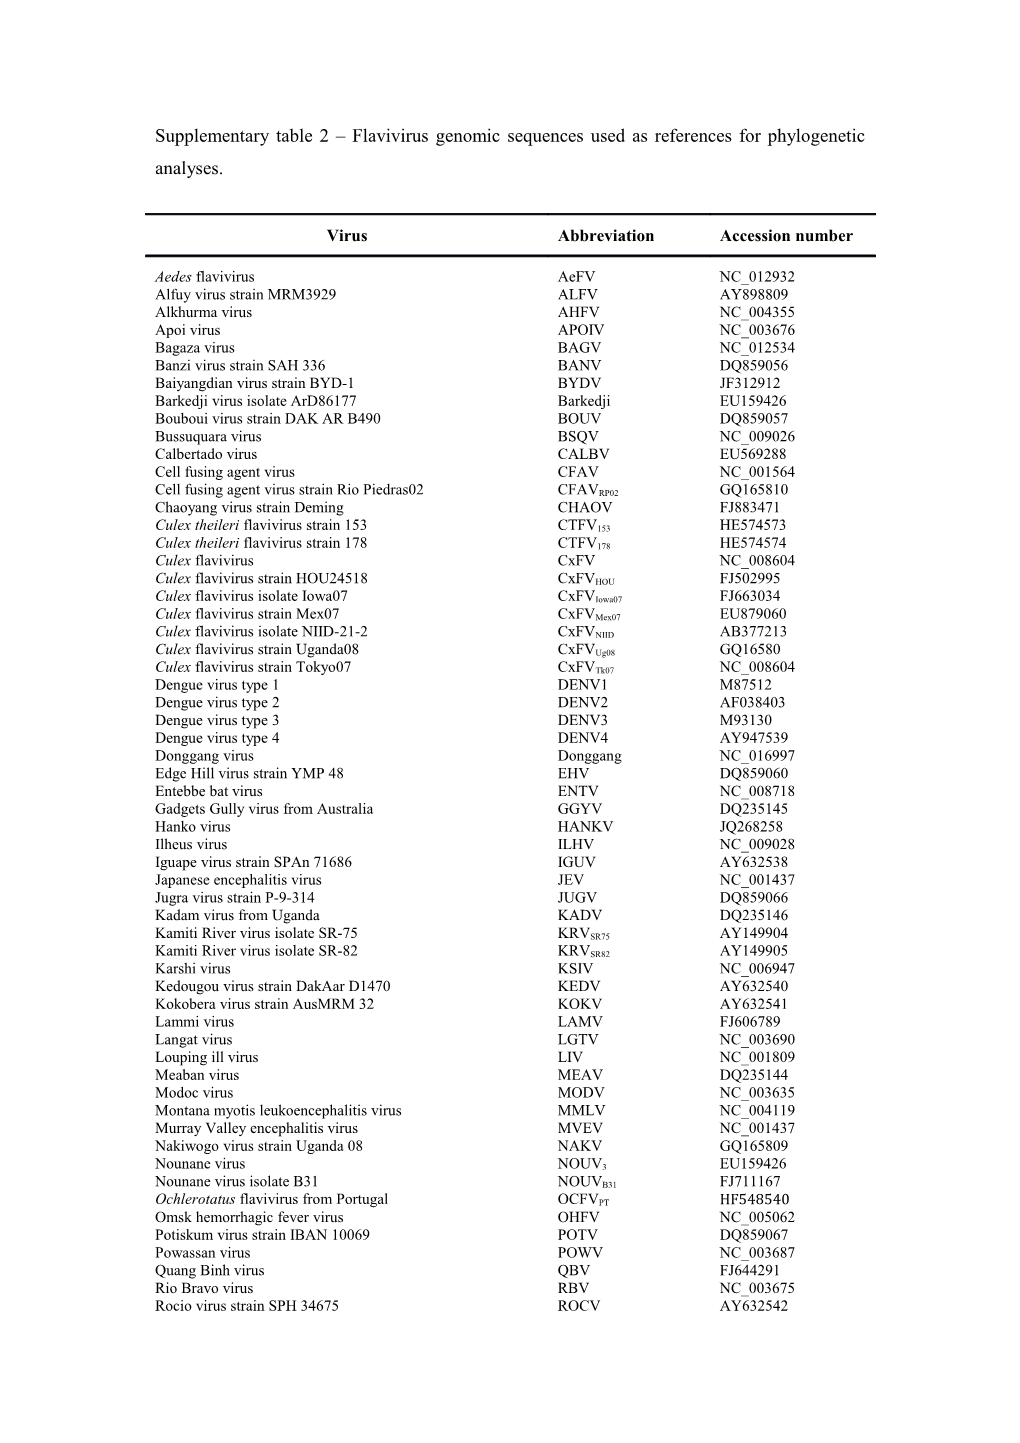 Supplementary Table 2 Flavivirus Genomic Sequences Used As References for Phylogenetic Analyses